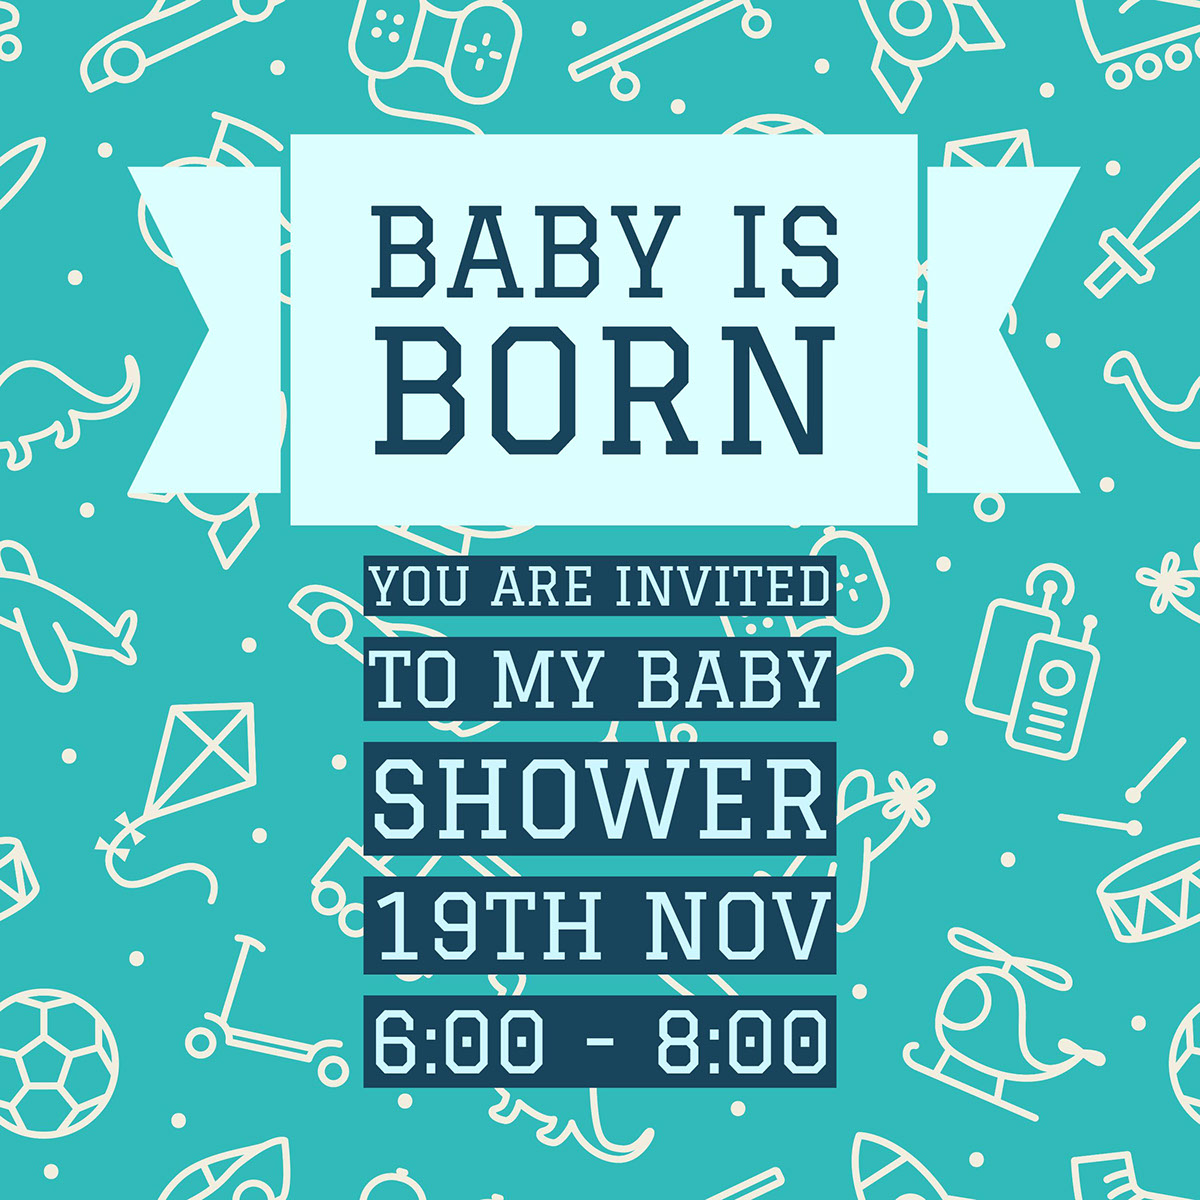 You are invited to my baby shower 19th Nov 6:00 - 8:00  You are invited to my baby shower 19th Nov 6:00 - 8:00  
Baby is born